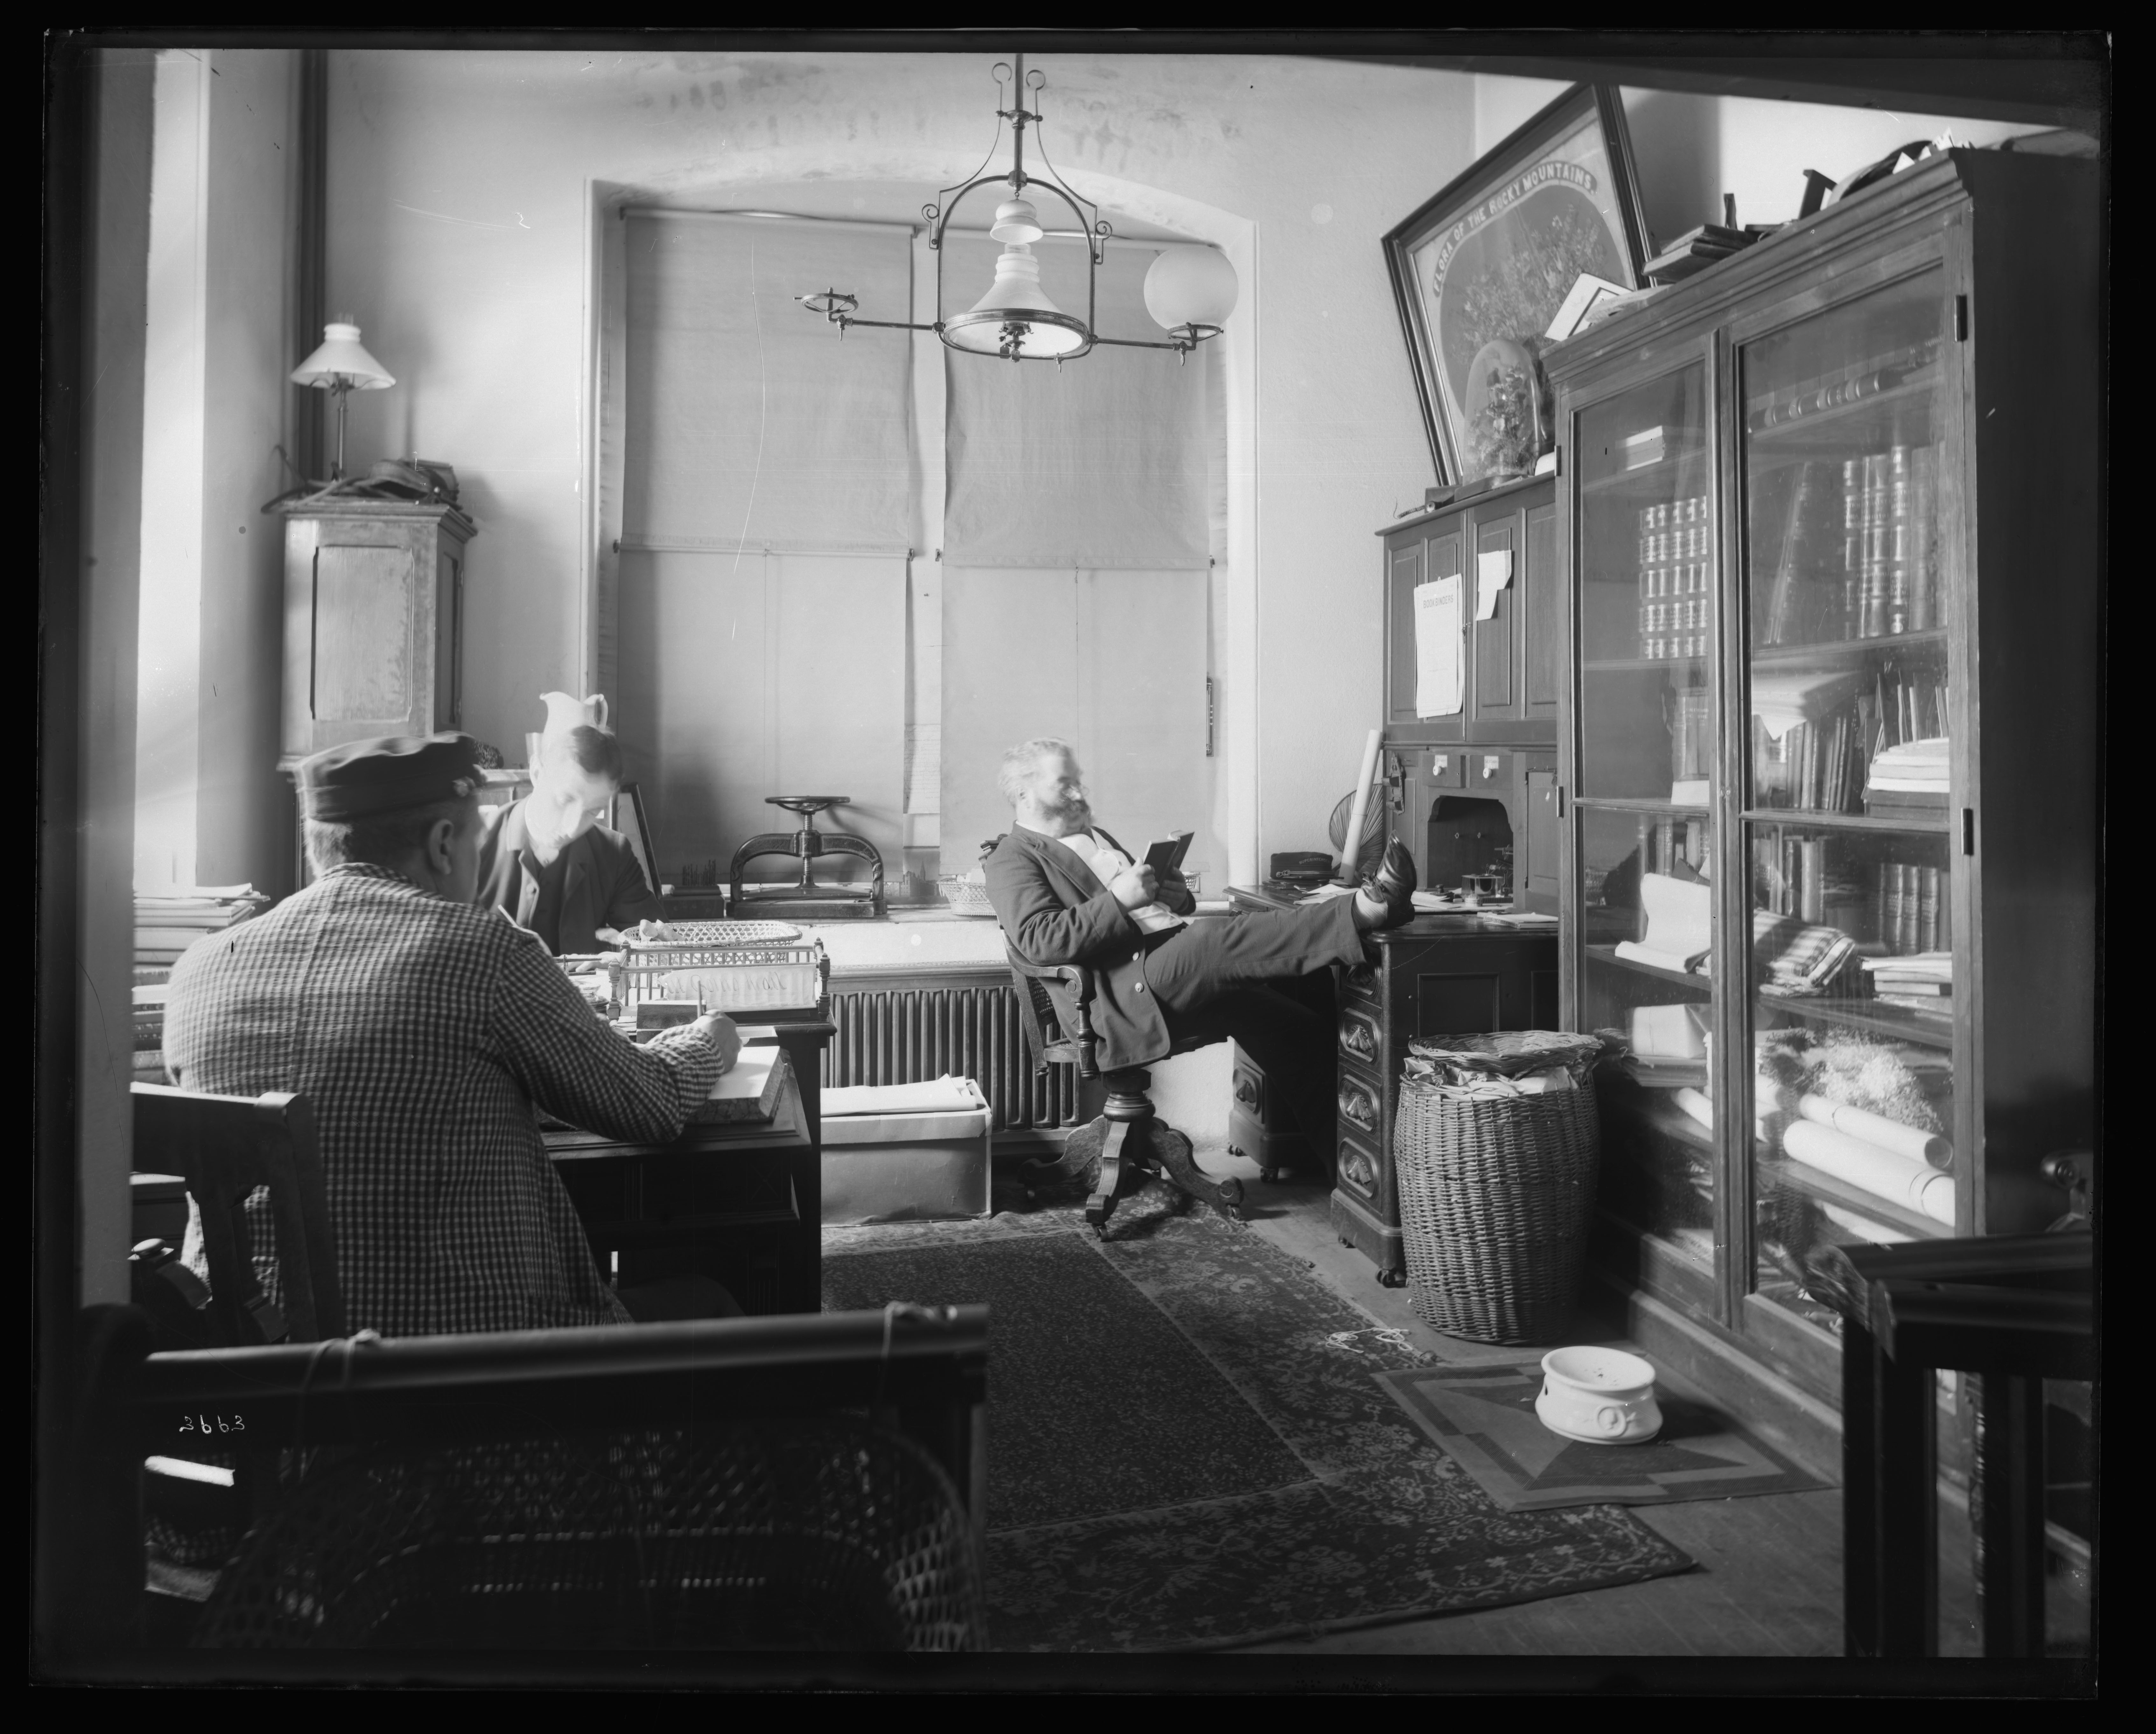 Black and white image of three men sitting at desks in an office space.